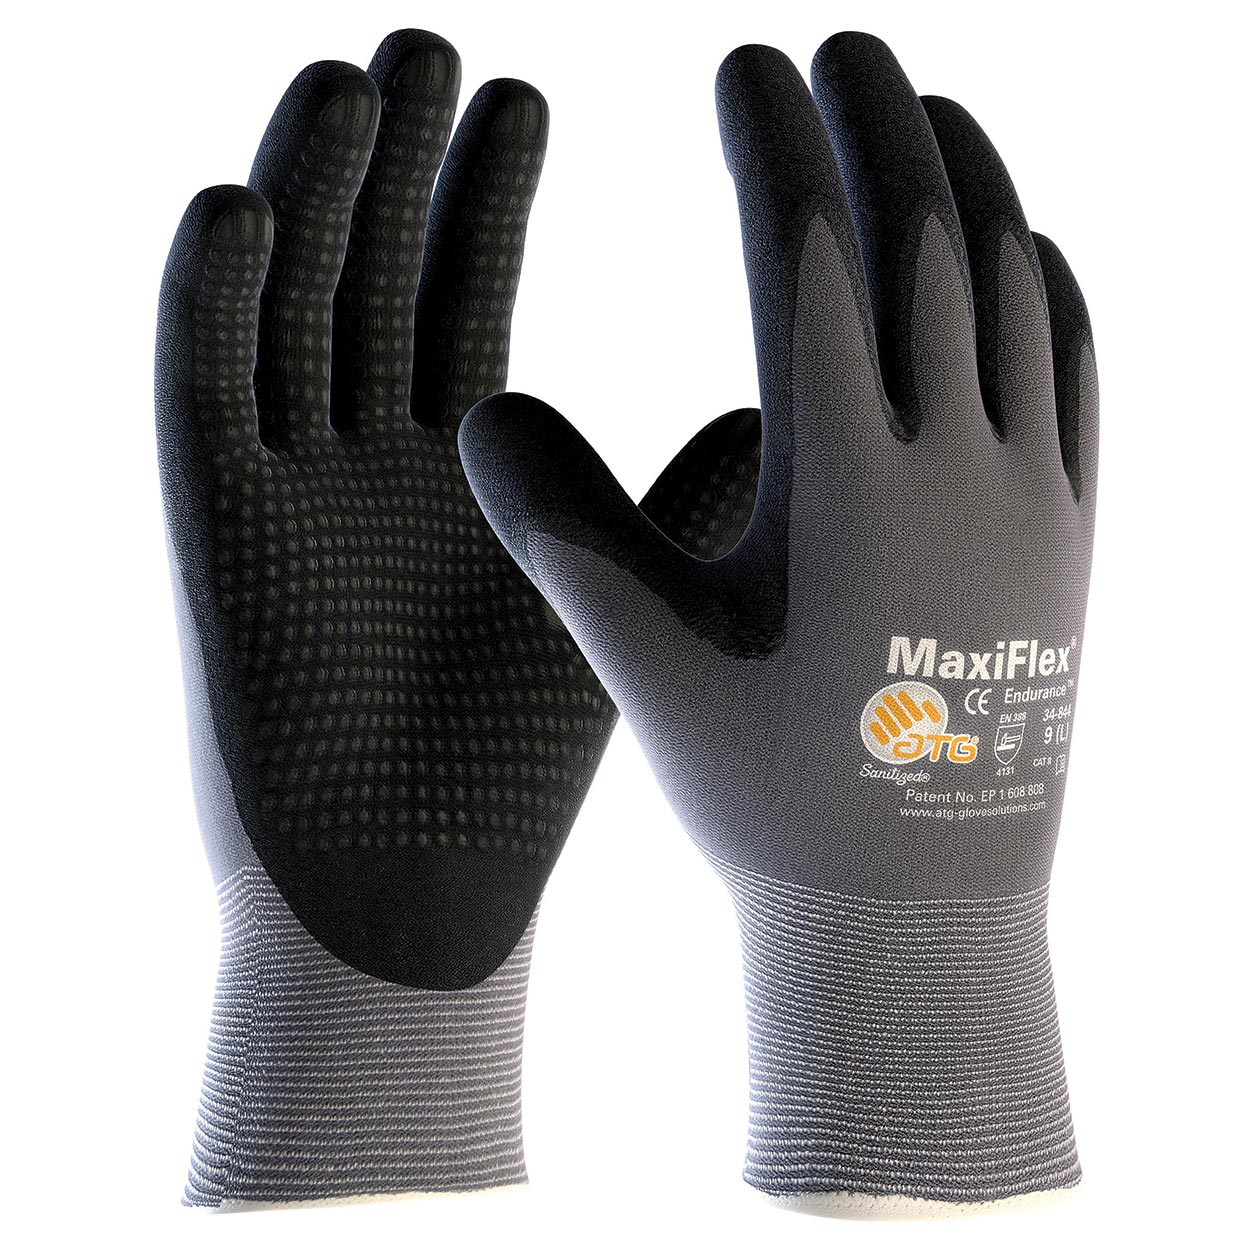 PIP 34-844 MaxiFlex Endurance Seamless Knit Nylon Gloves with Nitrile Coated Palm - Micro Dot Palm (12 Pairs)-eSafety Supplies, Inc